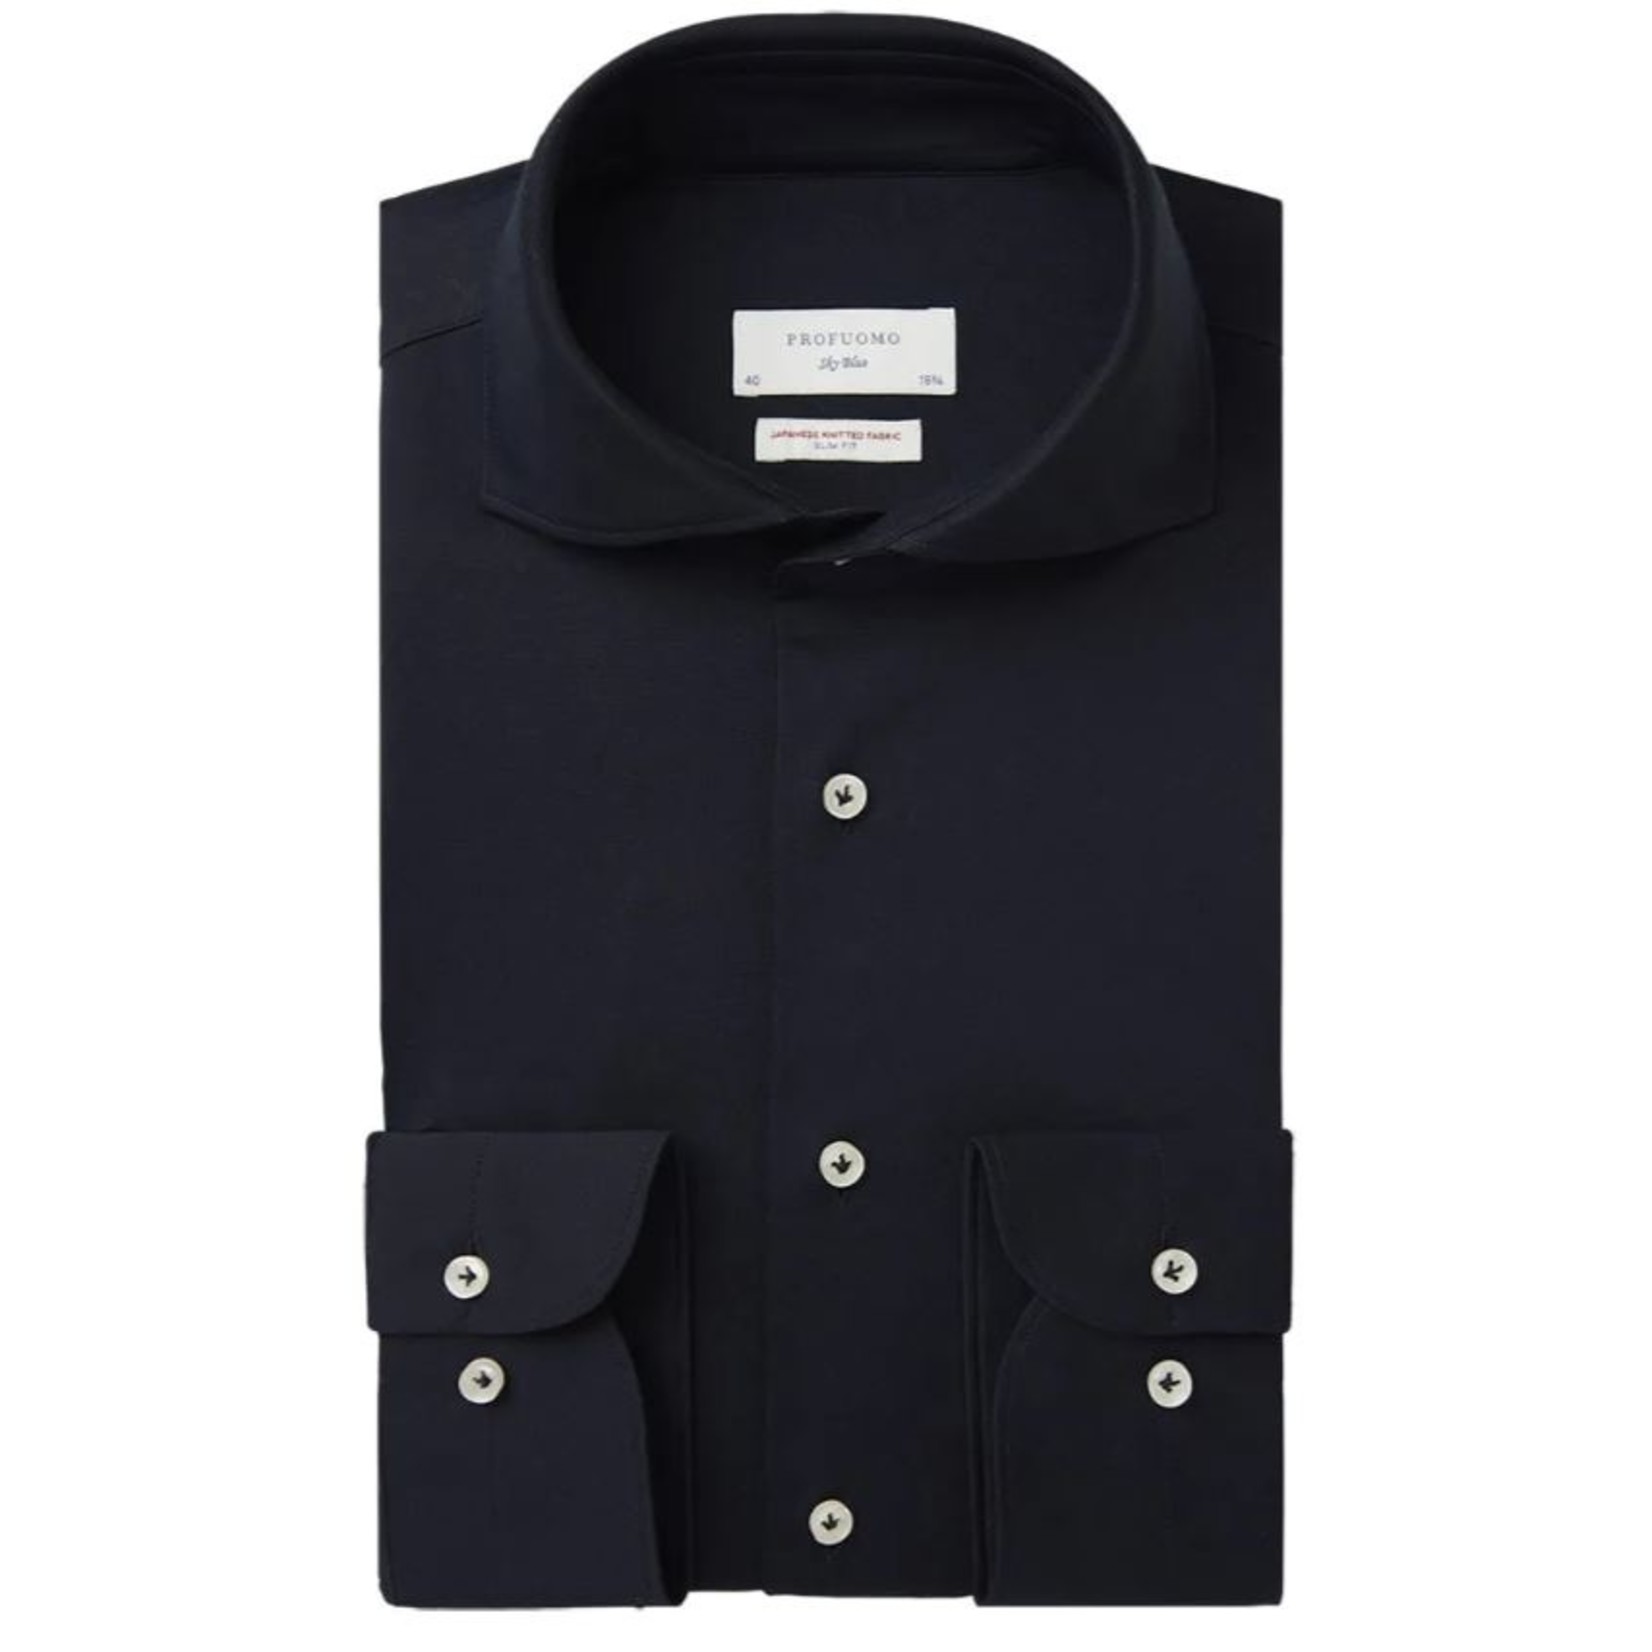 Profuomo Japanese Knitted Shirt - Navy